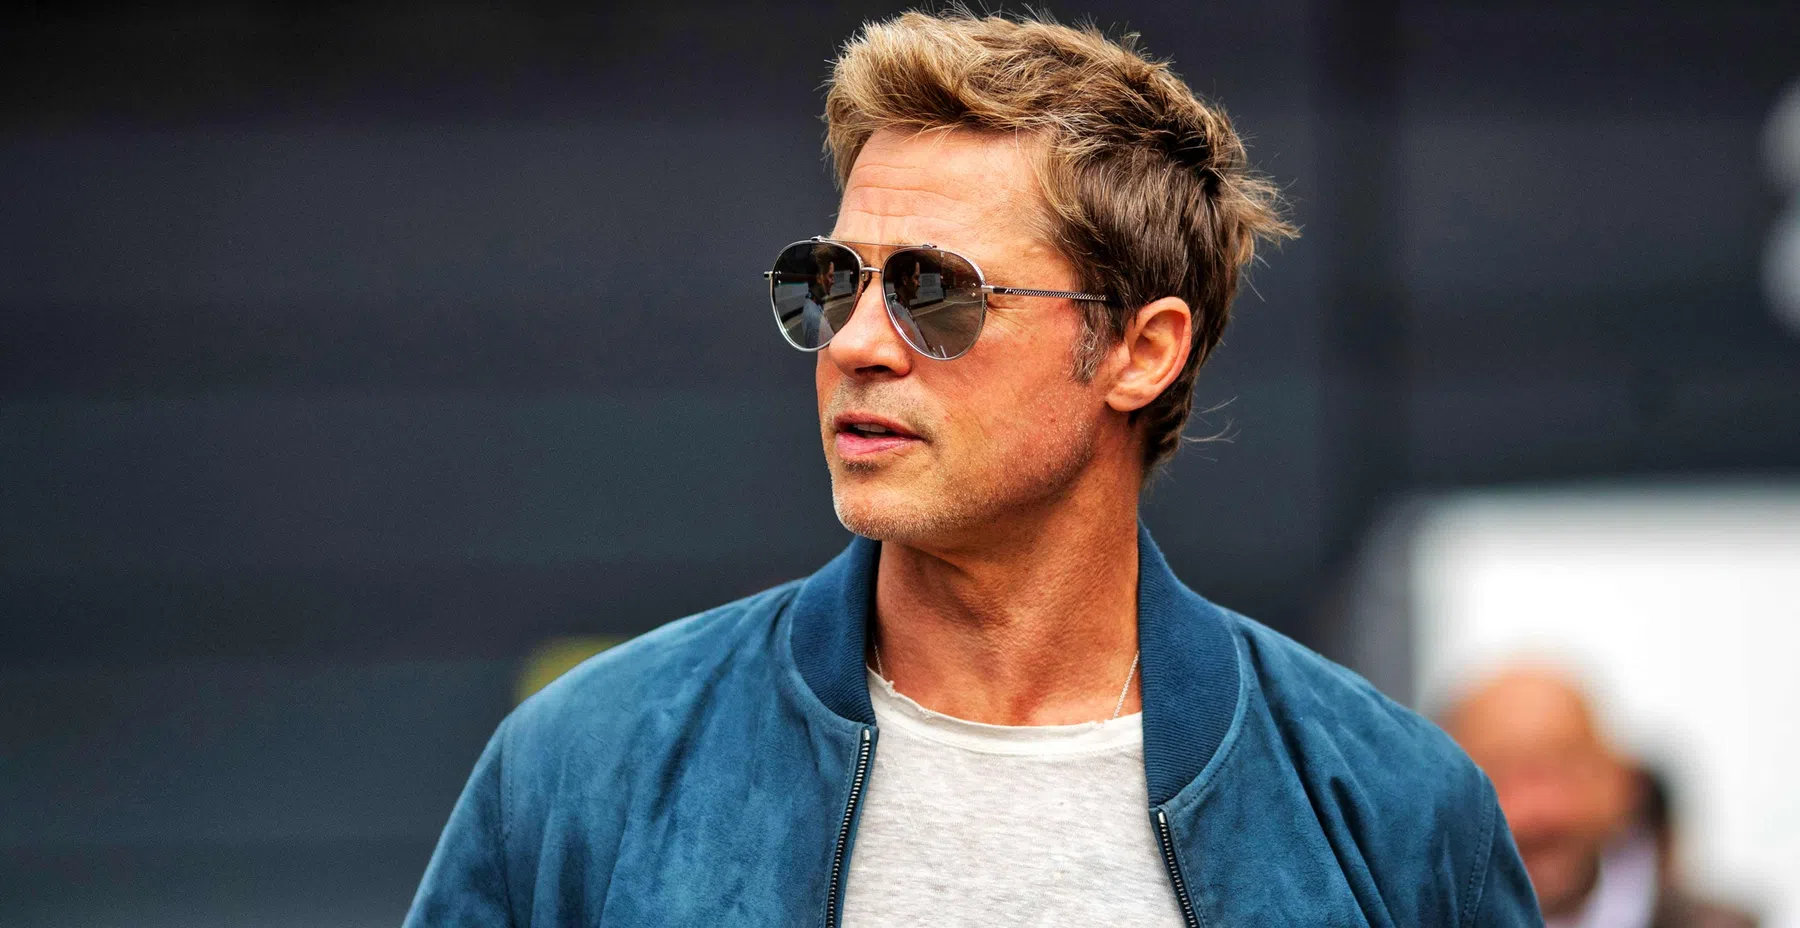 As well as F1 film Hamilton, Brad Pitt is working on film about Isle of Man